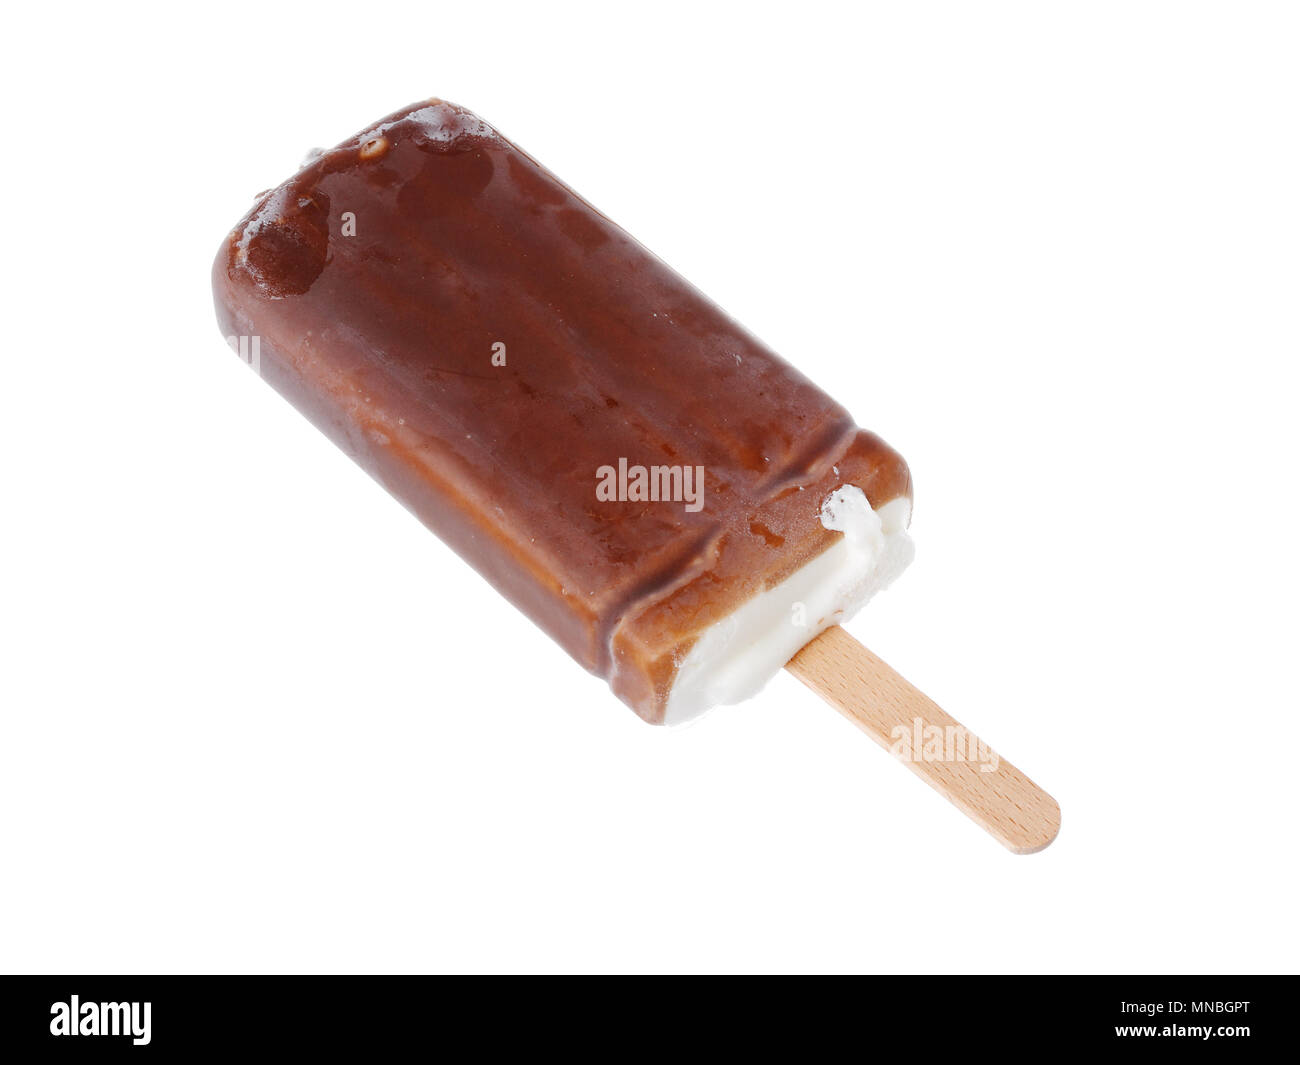 Chocloate covered ice cream lolly isolated on white background. Stock Photo